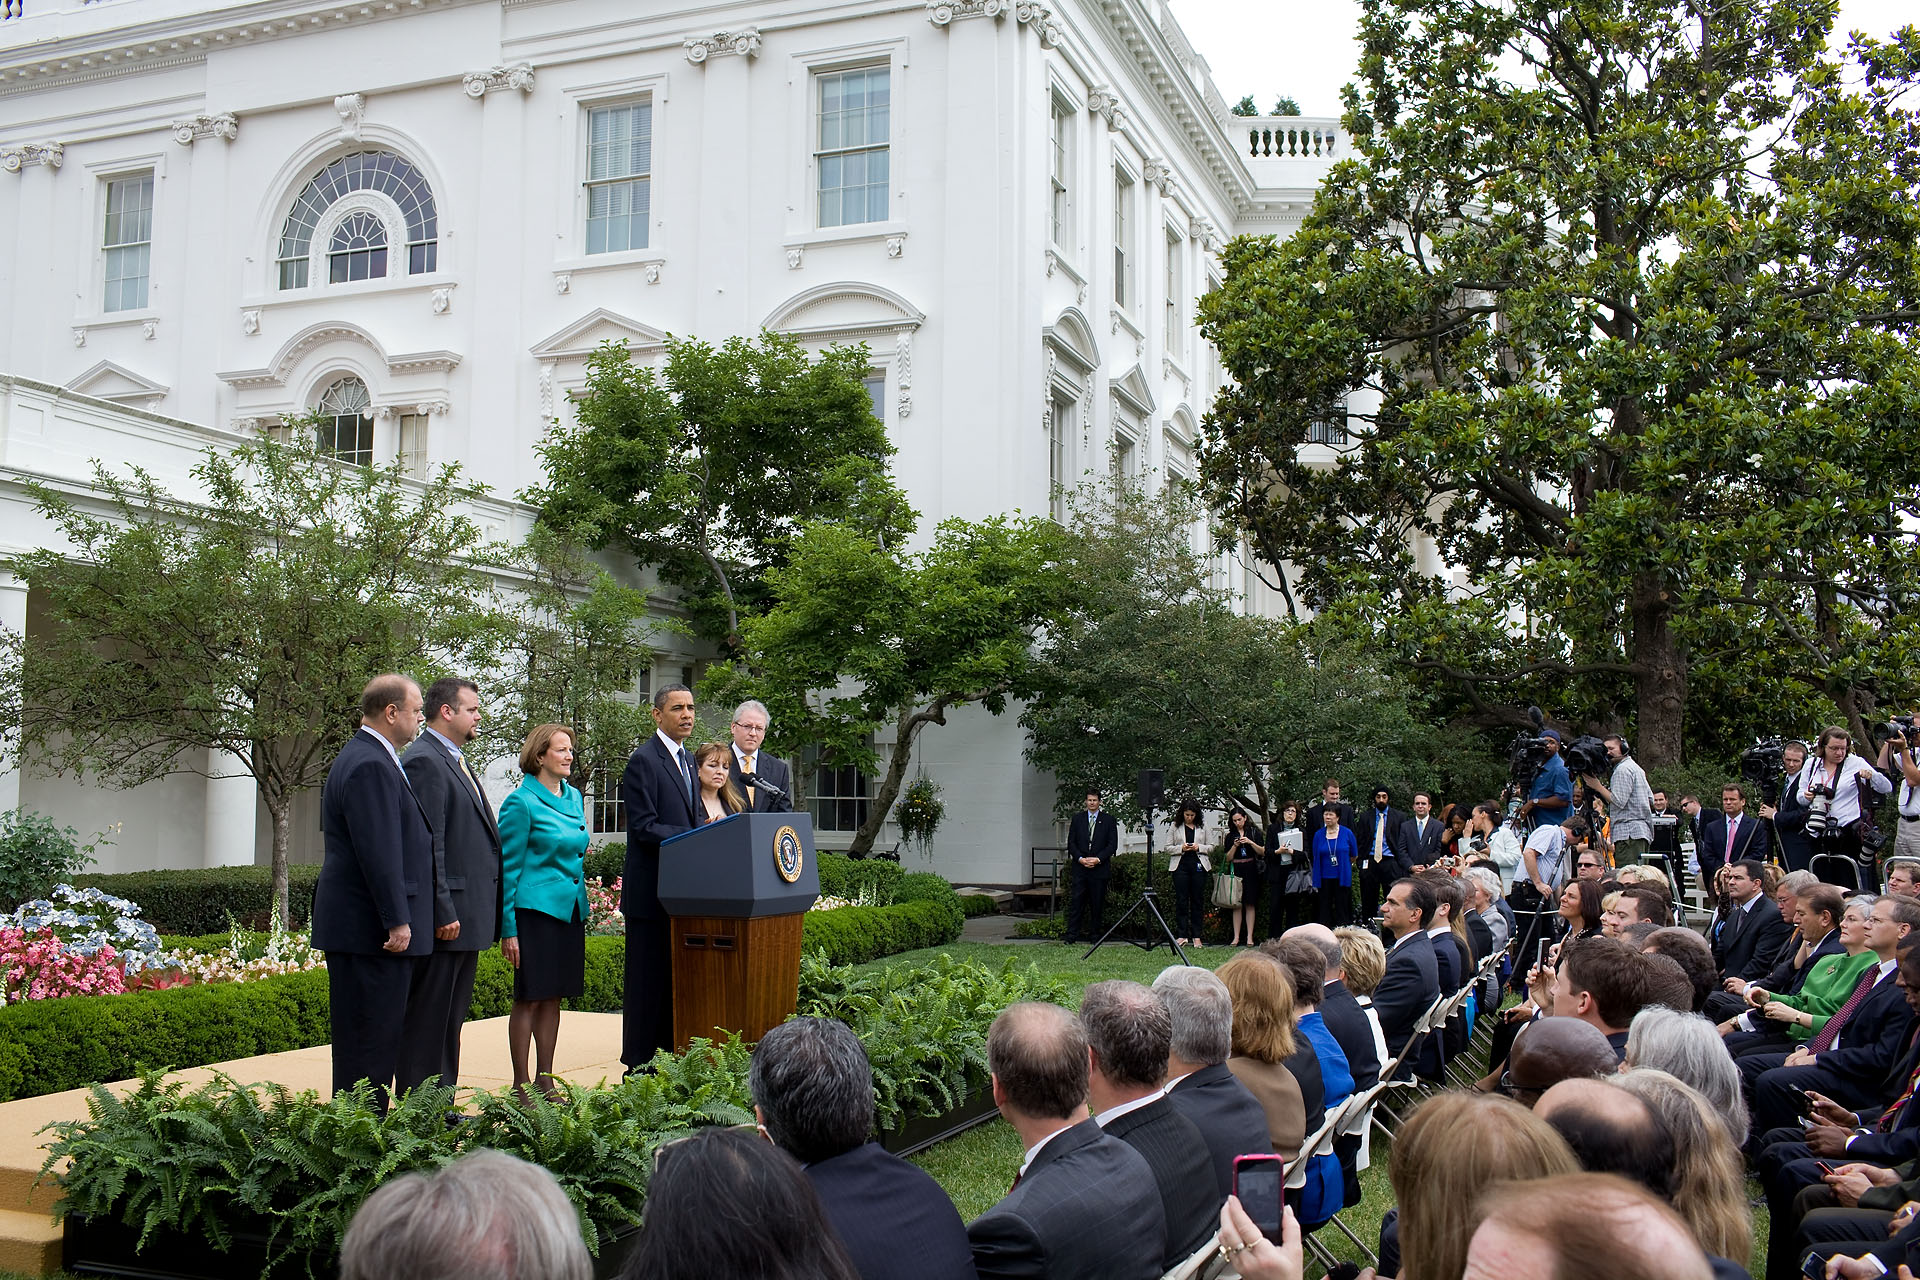 President Obama and Award-Winning Small Business Owners